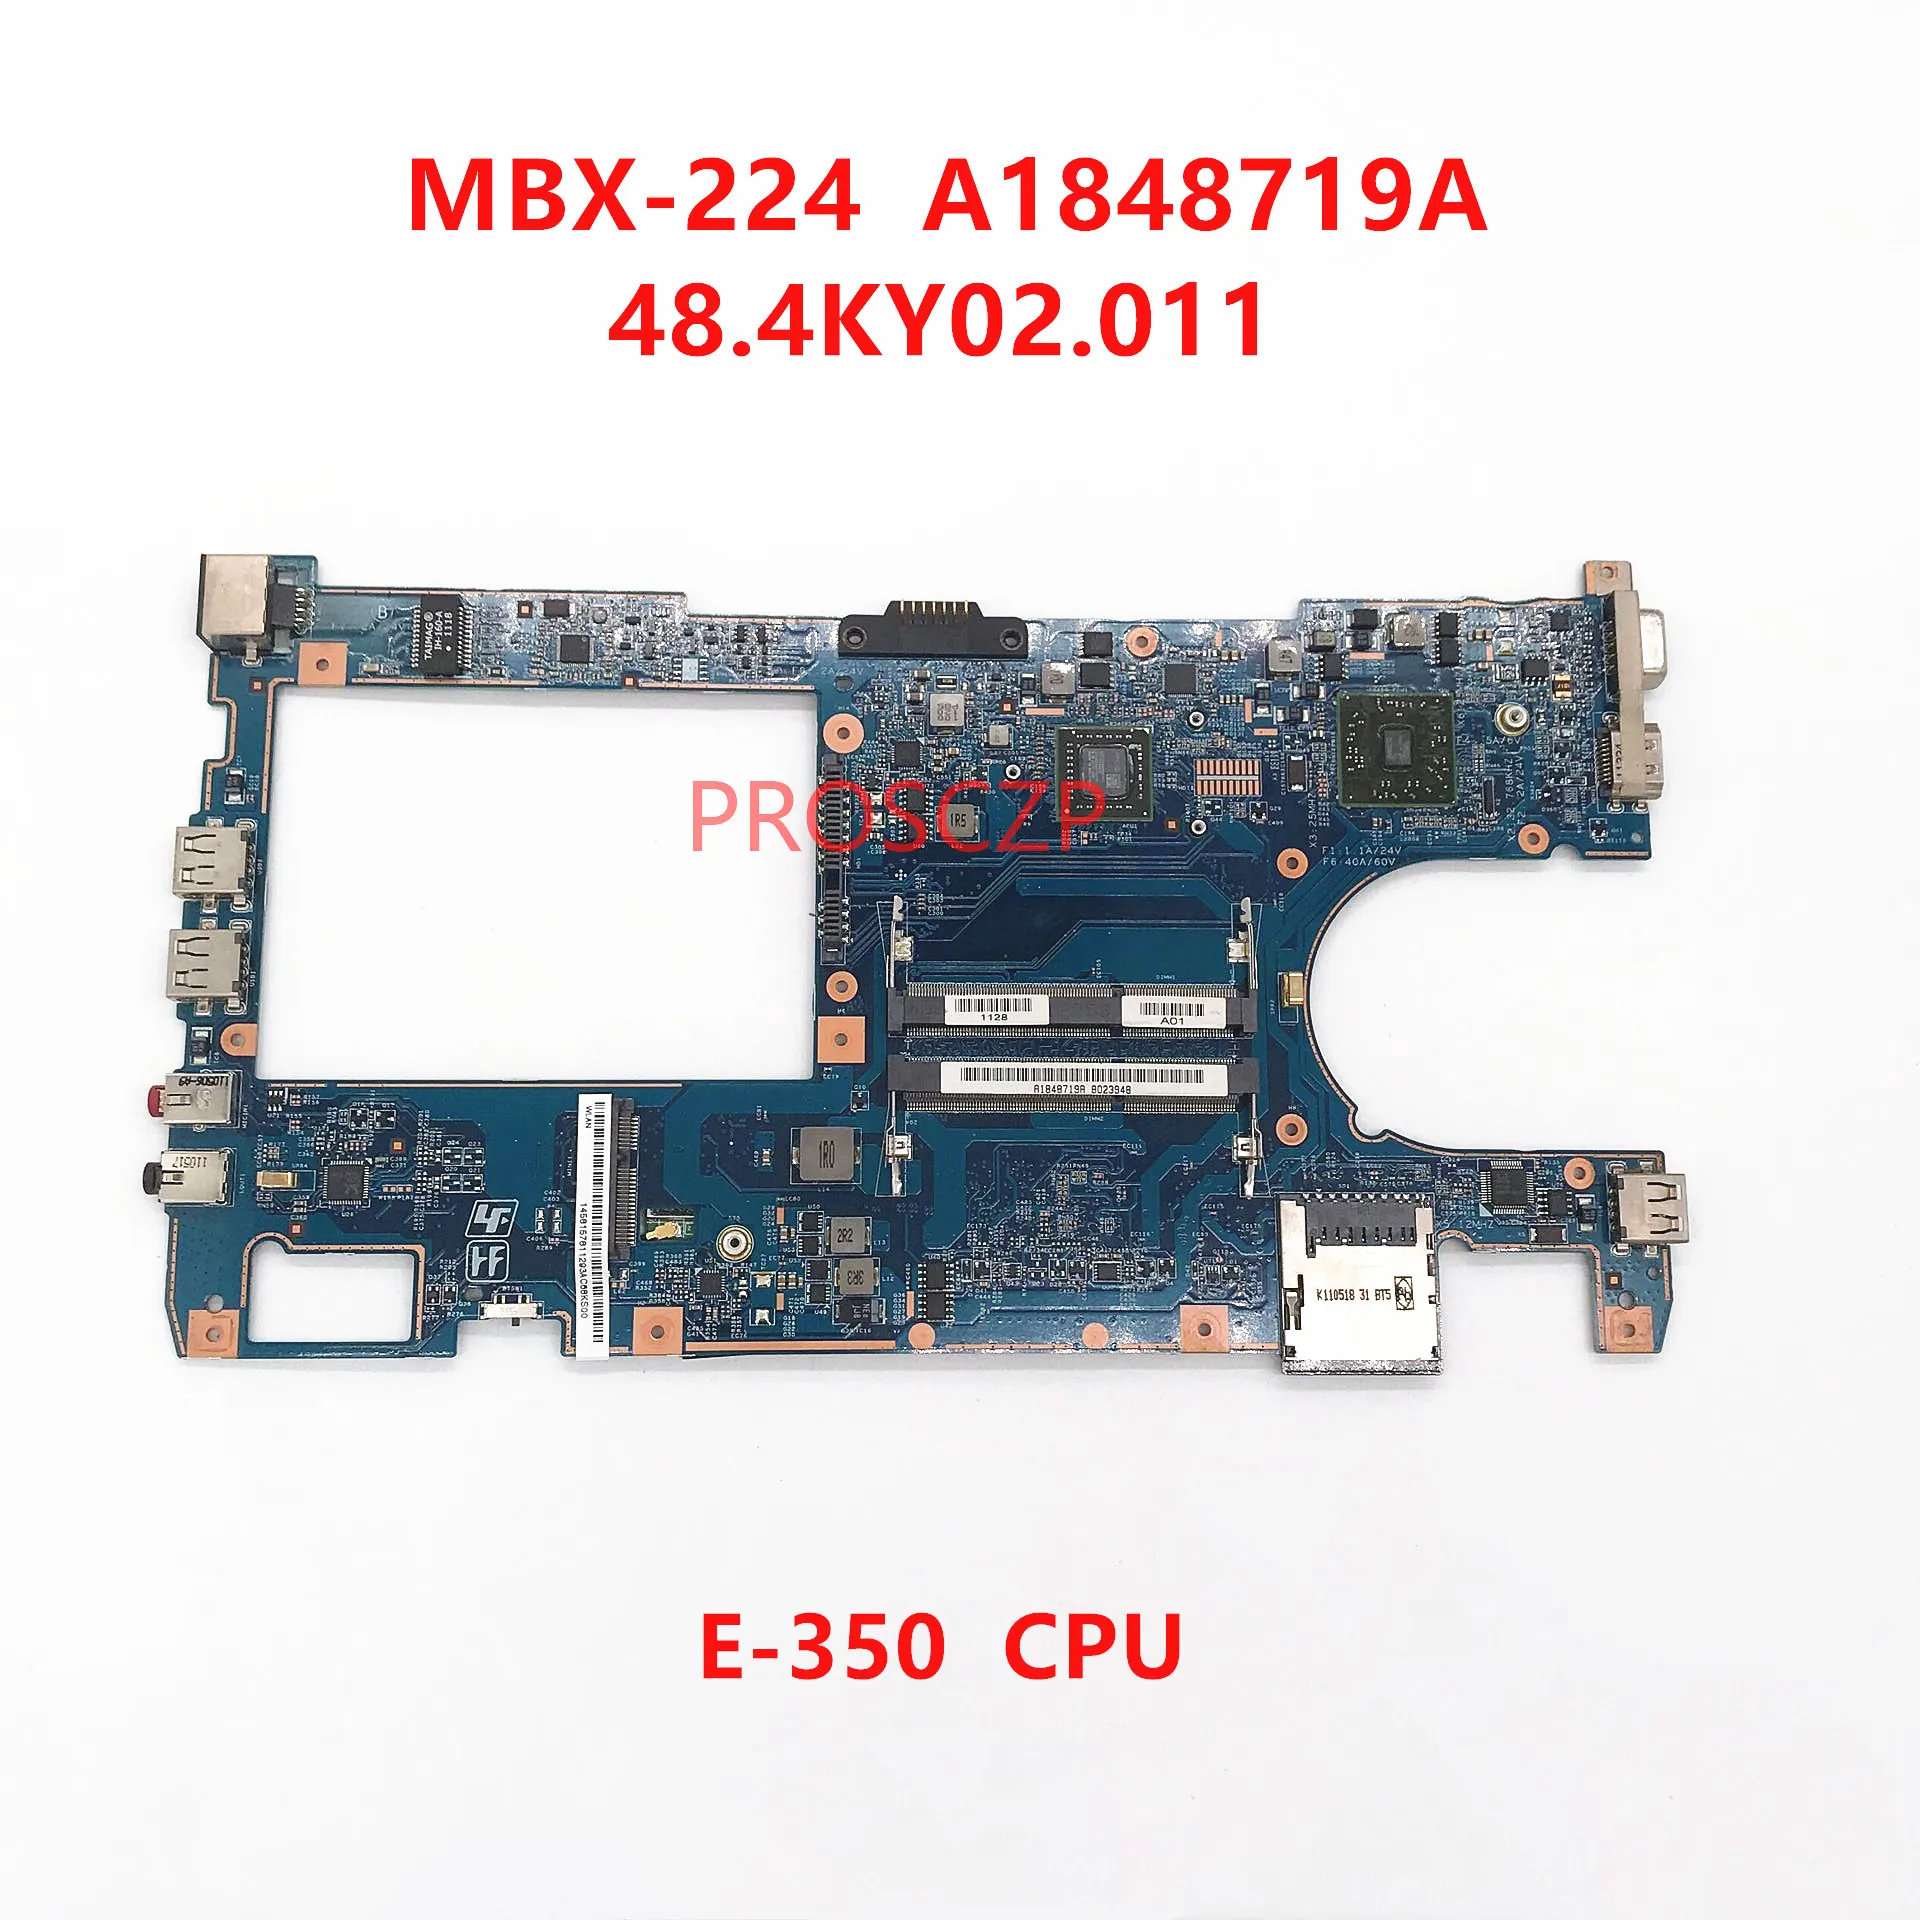 High Quality Mainboard For Sony VPCYB3V1E MBX-224 A1848719A Laptop Motherboard 48.4KY02.011 W/ E-350 CPU 100% Full Working Well